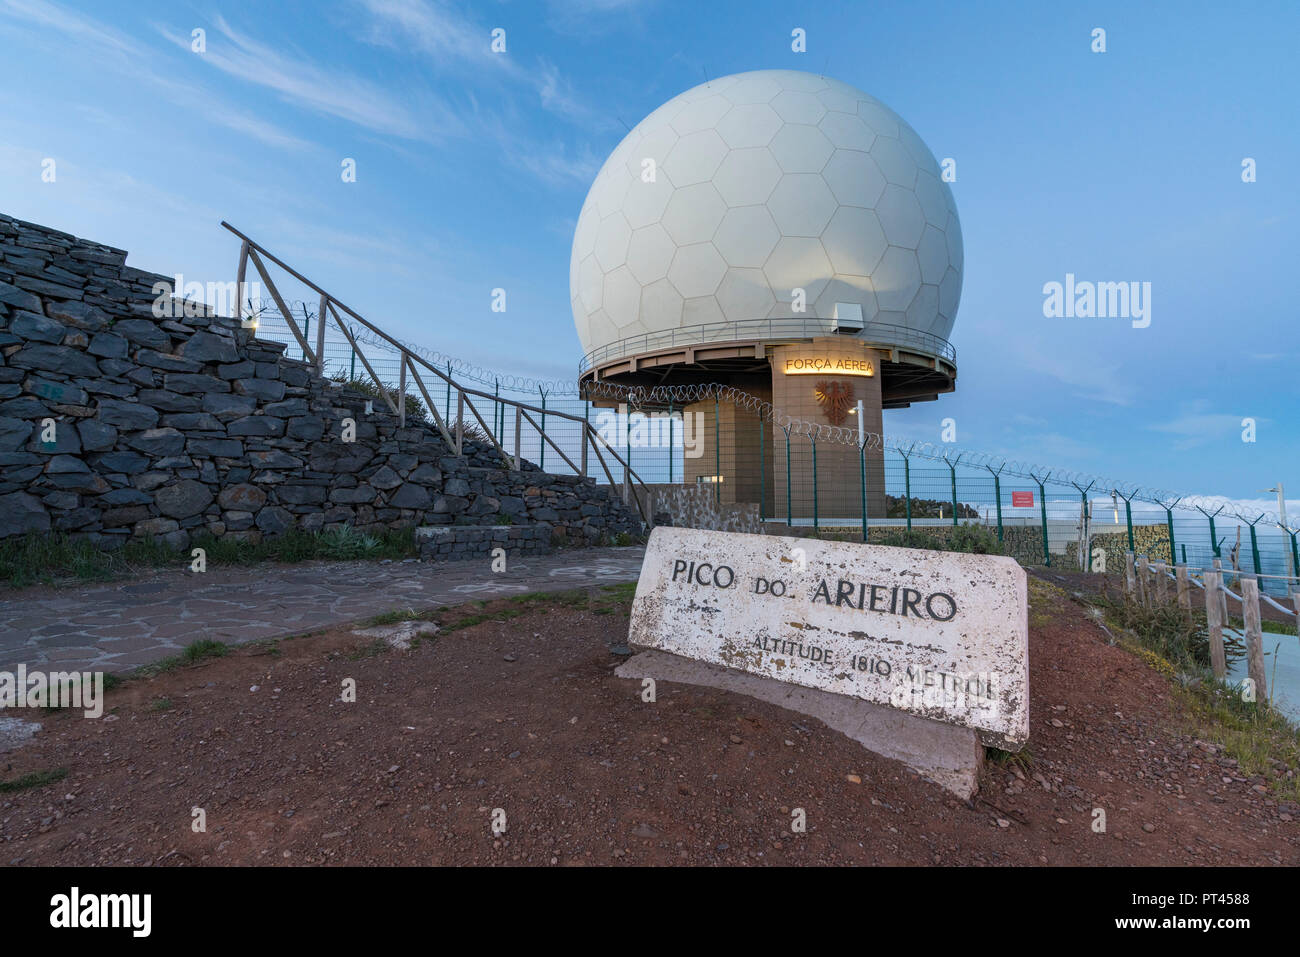 Observatory and signpost on the summit of Pico do Arieiro, Funchal, Madeira region, Portugal, Stock Photo